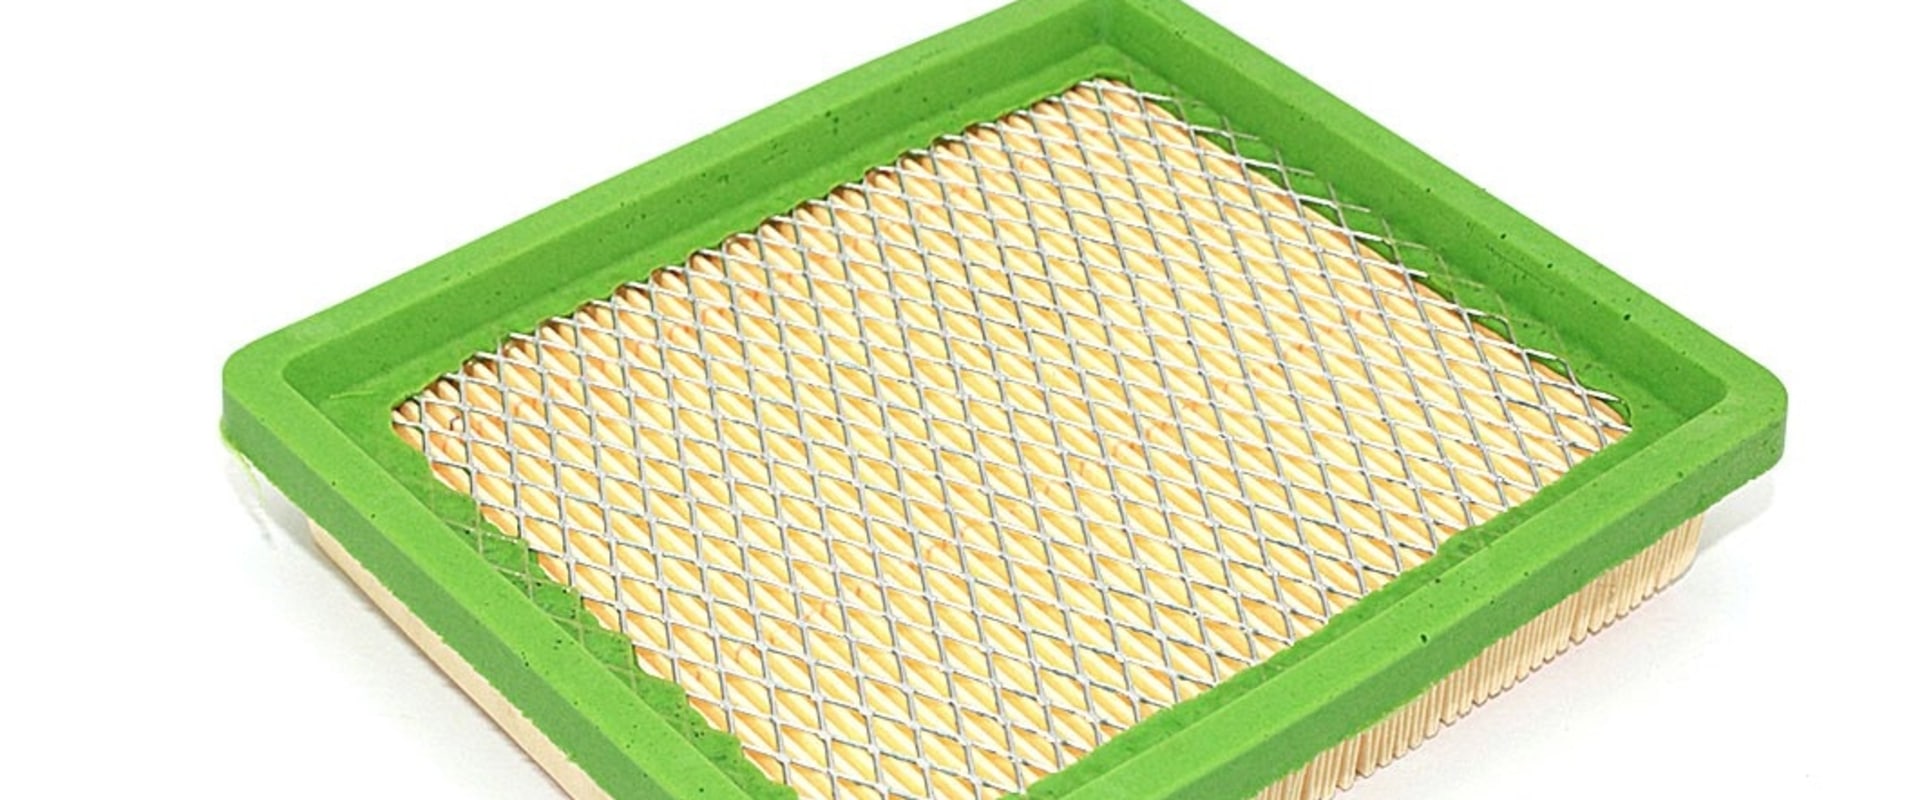 How to Easily Find the Right Air Filter Size